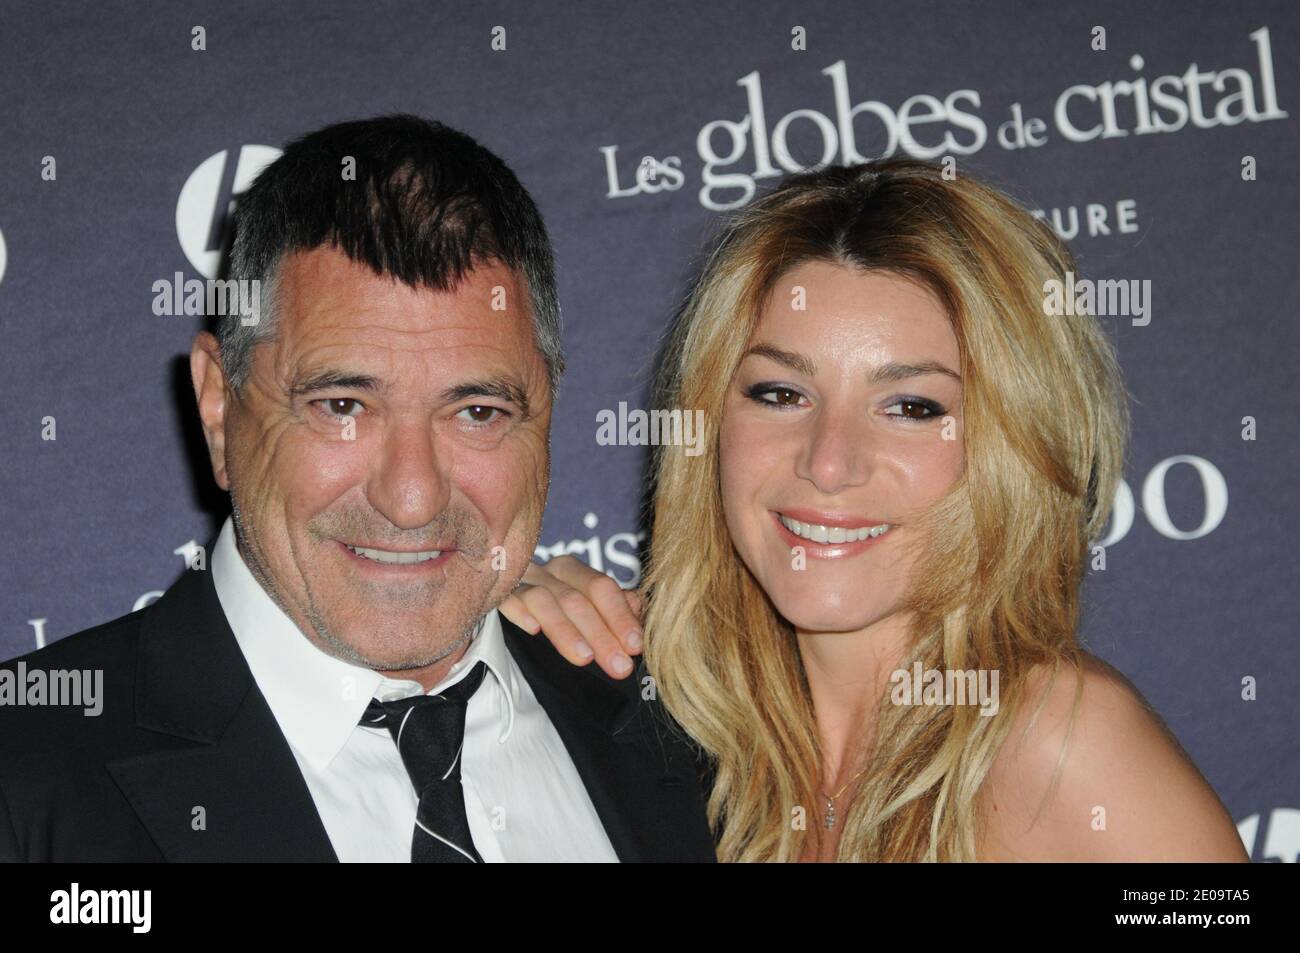 Jean-Marie Bigard and wife Lola Marois attending the Premiere of '2 Days in  New York' held at the MK2 Bibliotheque movie theatre in Paris, France on  March 19, 2012. Photo by Nicolas